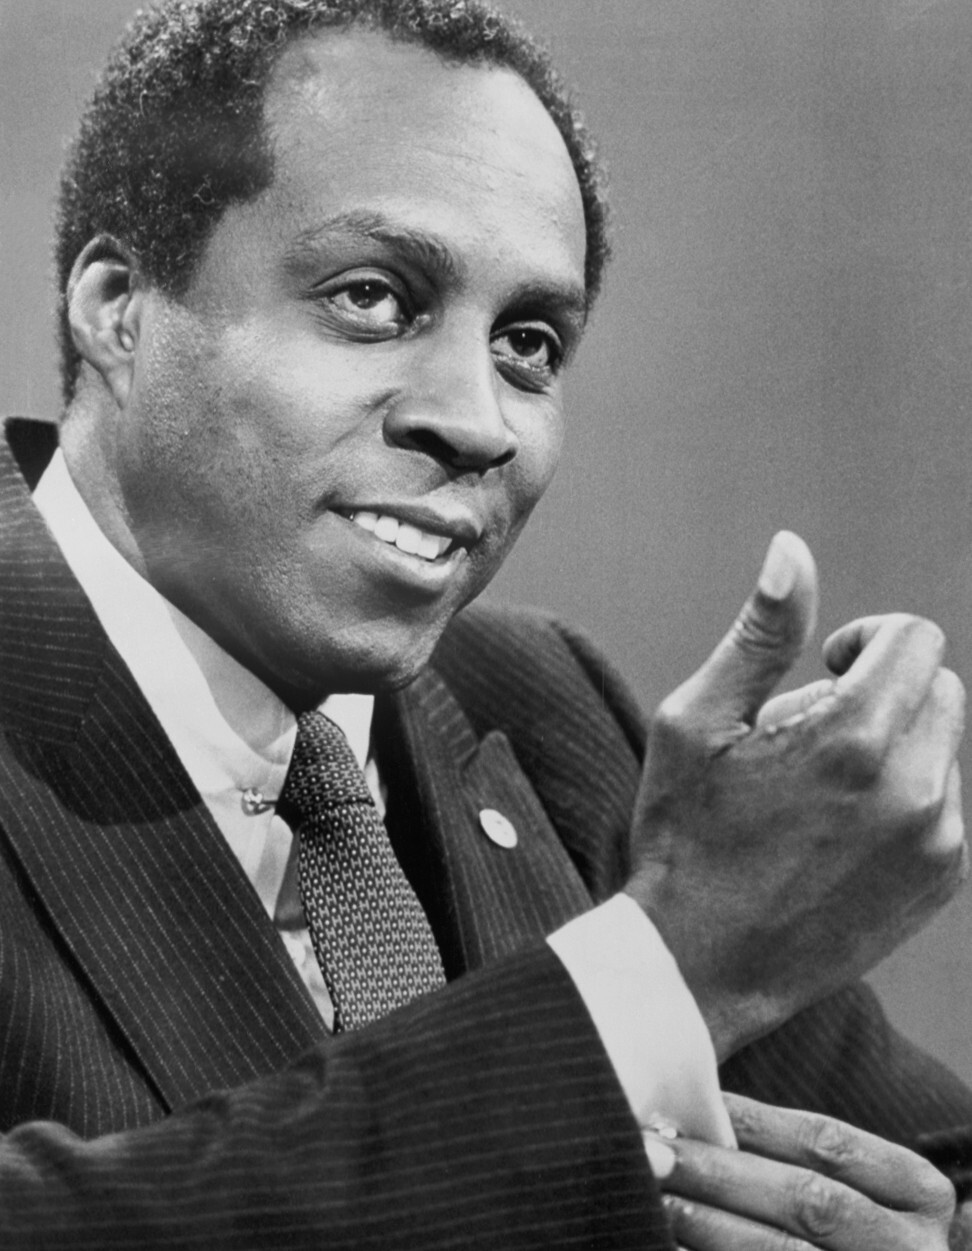 Civil rights leader and National Urban League president Vernon Jordan was rushed to hospital with several internal injuries after being shot in the back in May 1980 in Indiana, US. Photo: Handout